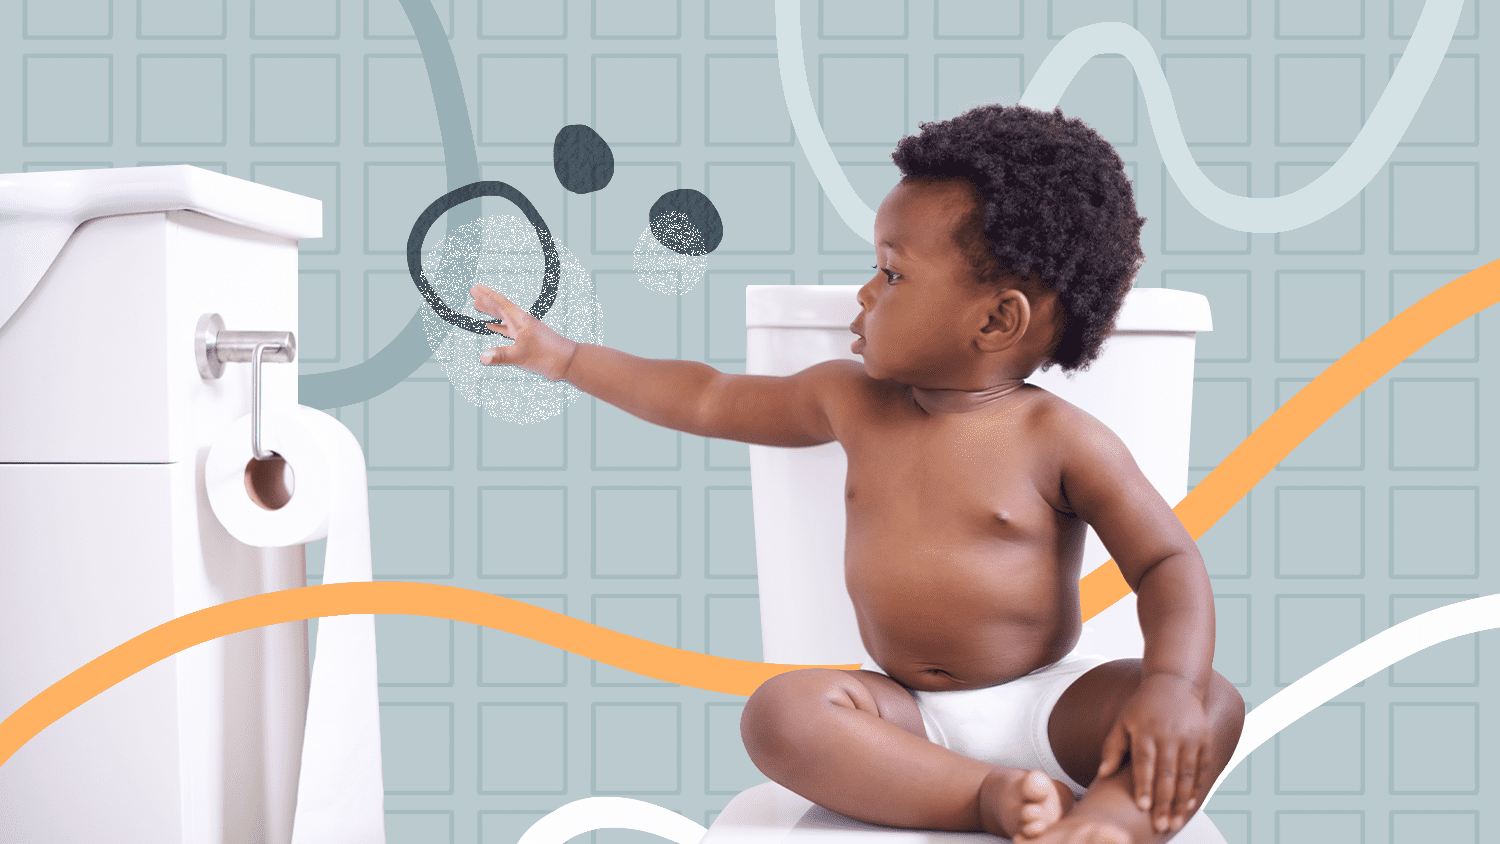 How To Create Good Habits While Toilet Training Your Child